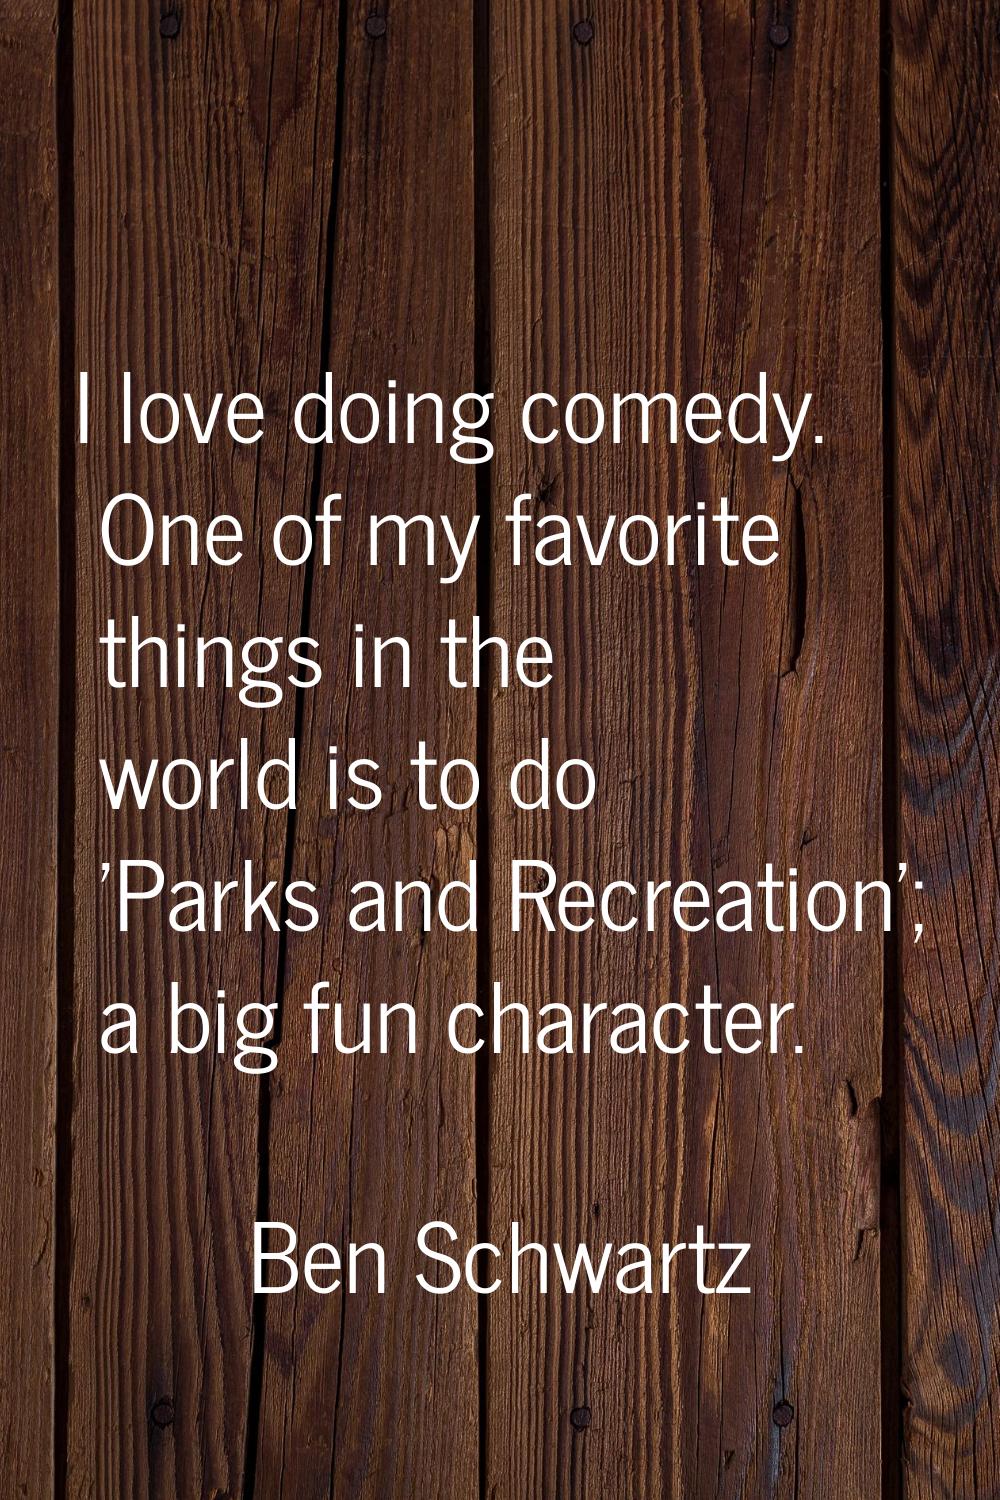 I love doing comedy. One of my favorite things in the world is to do 'Parks and Recreation'; a big 